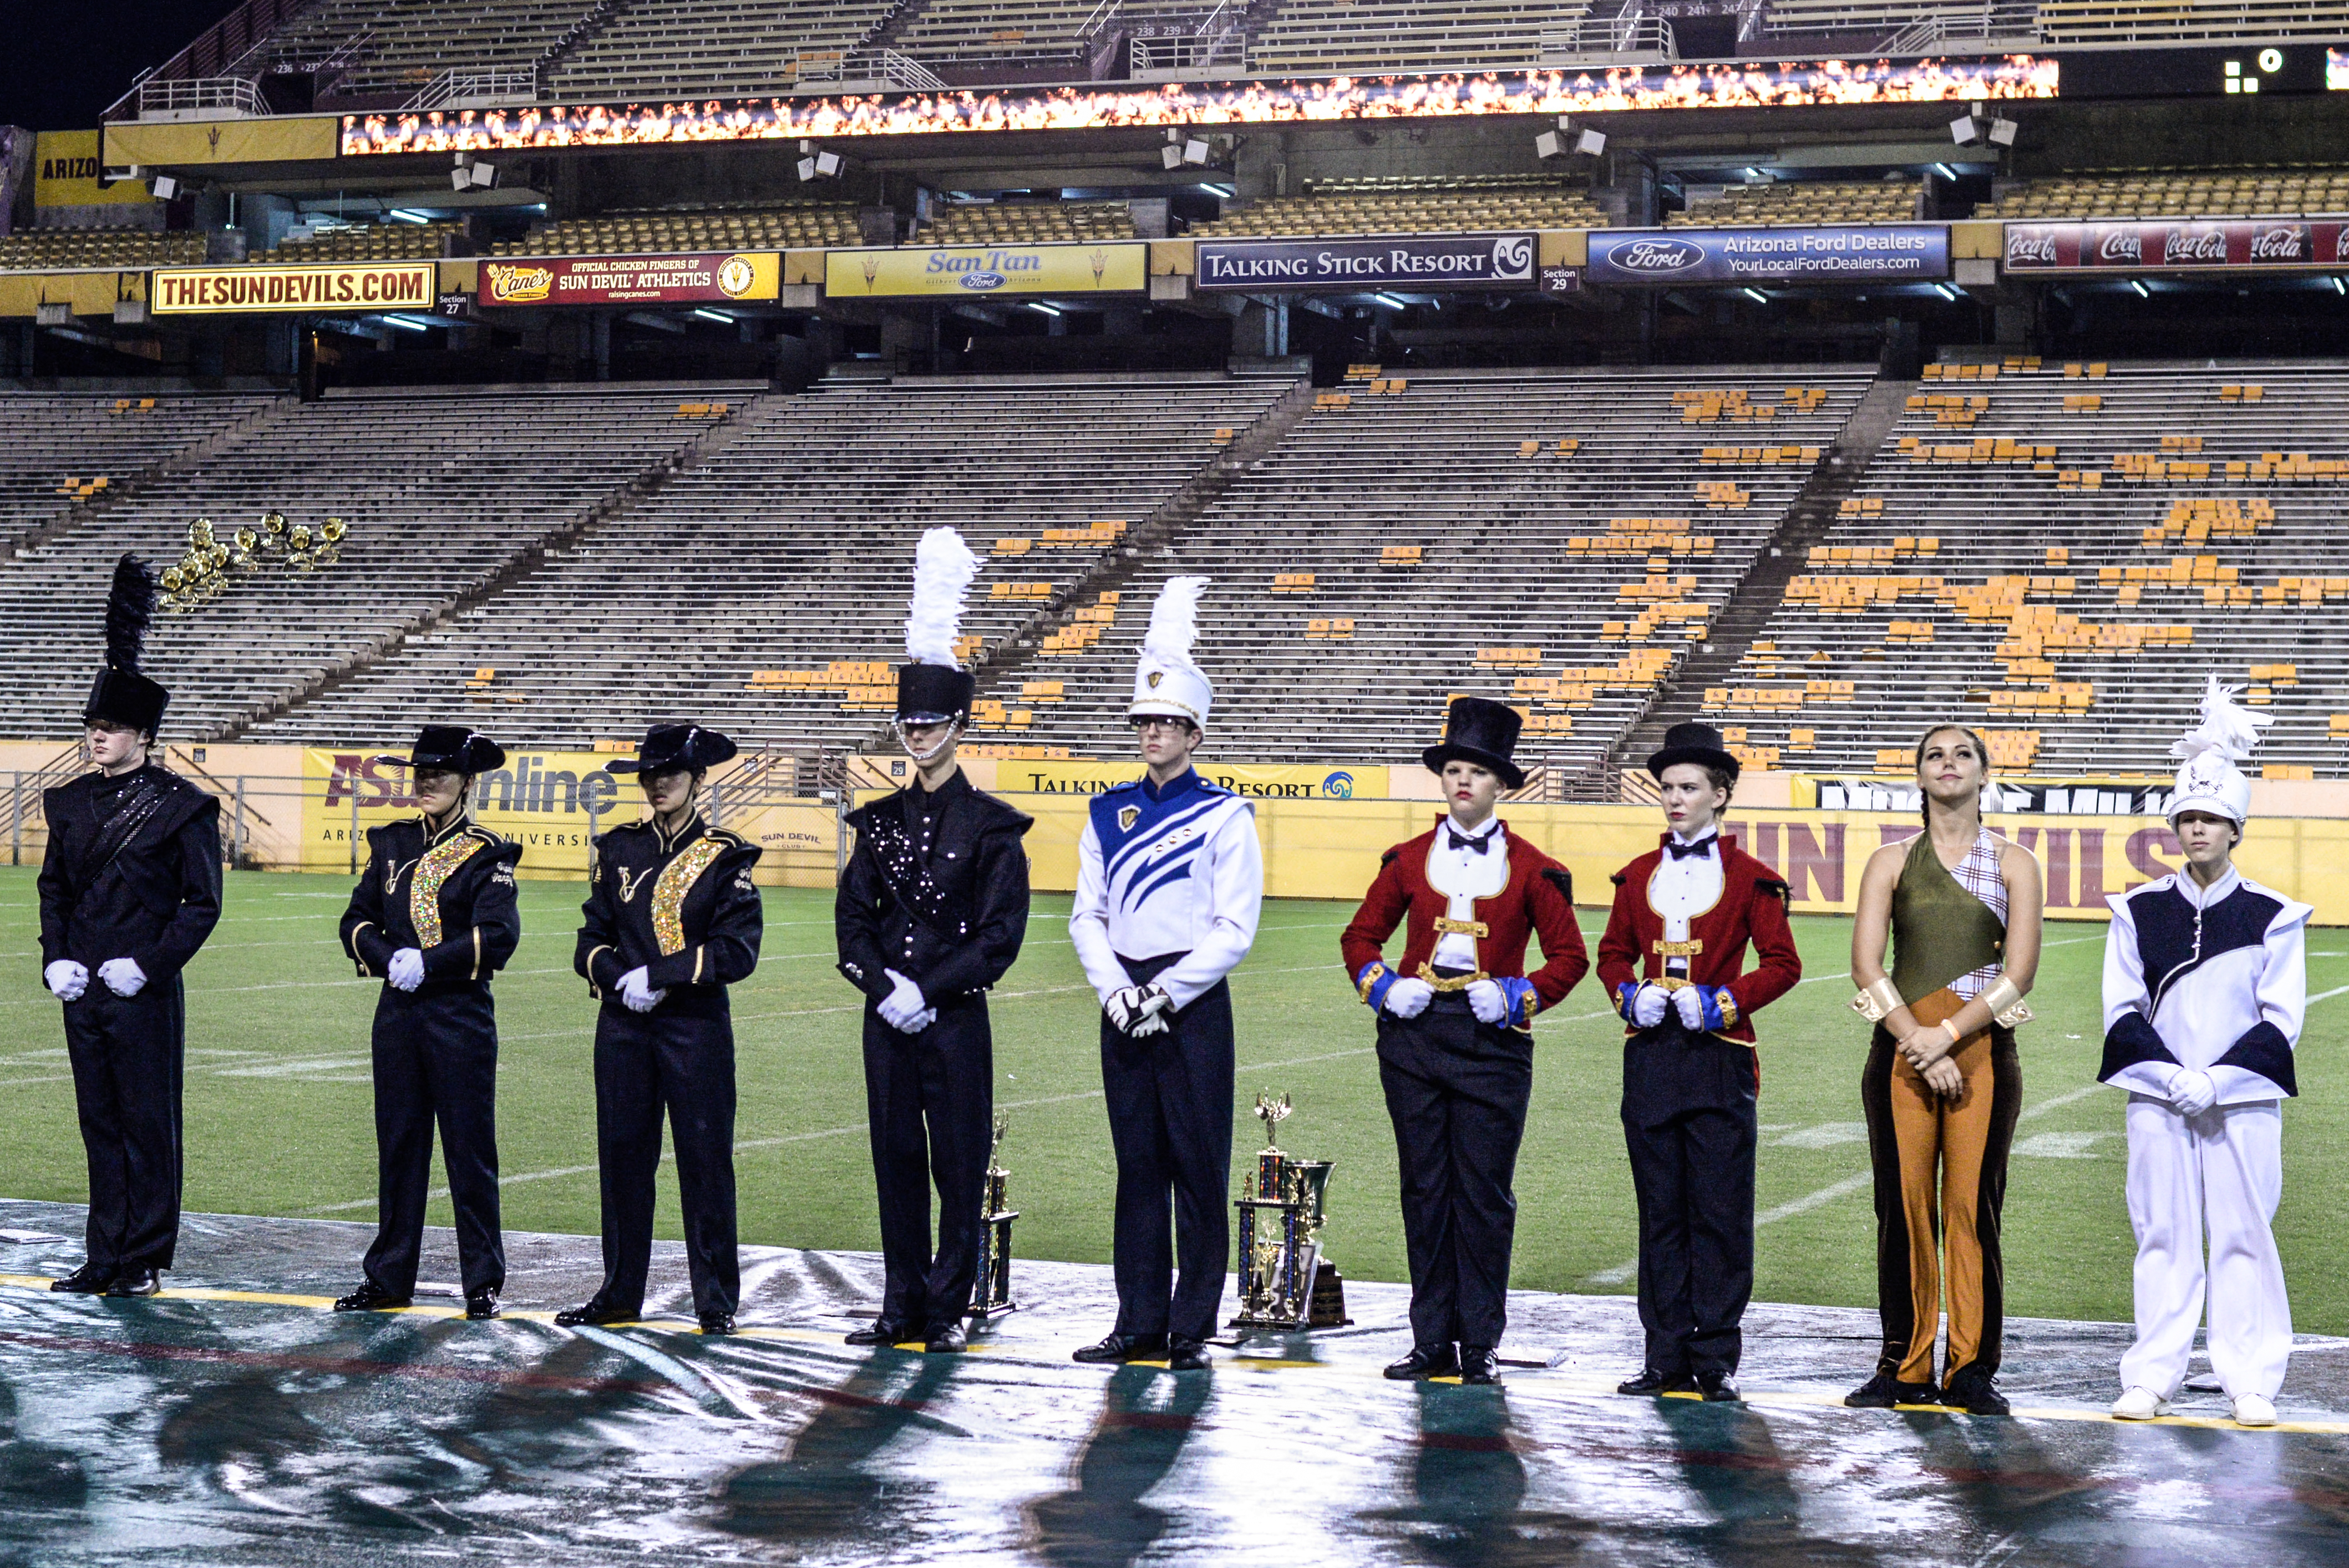 Members of high school marching bands line up at Sun Devil Stadium